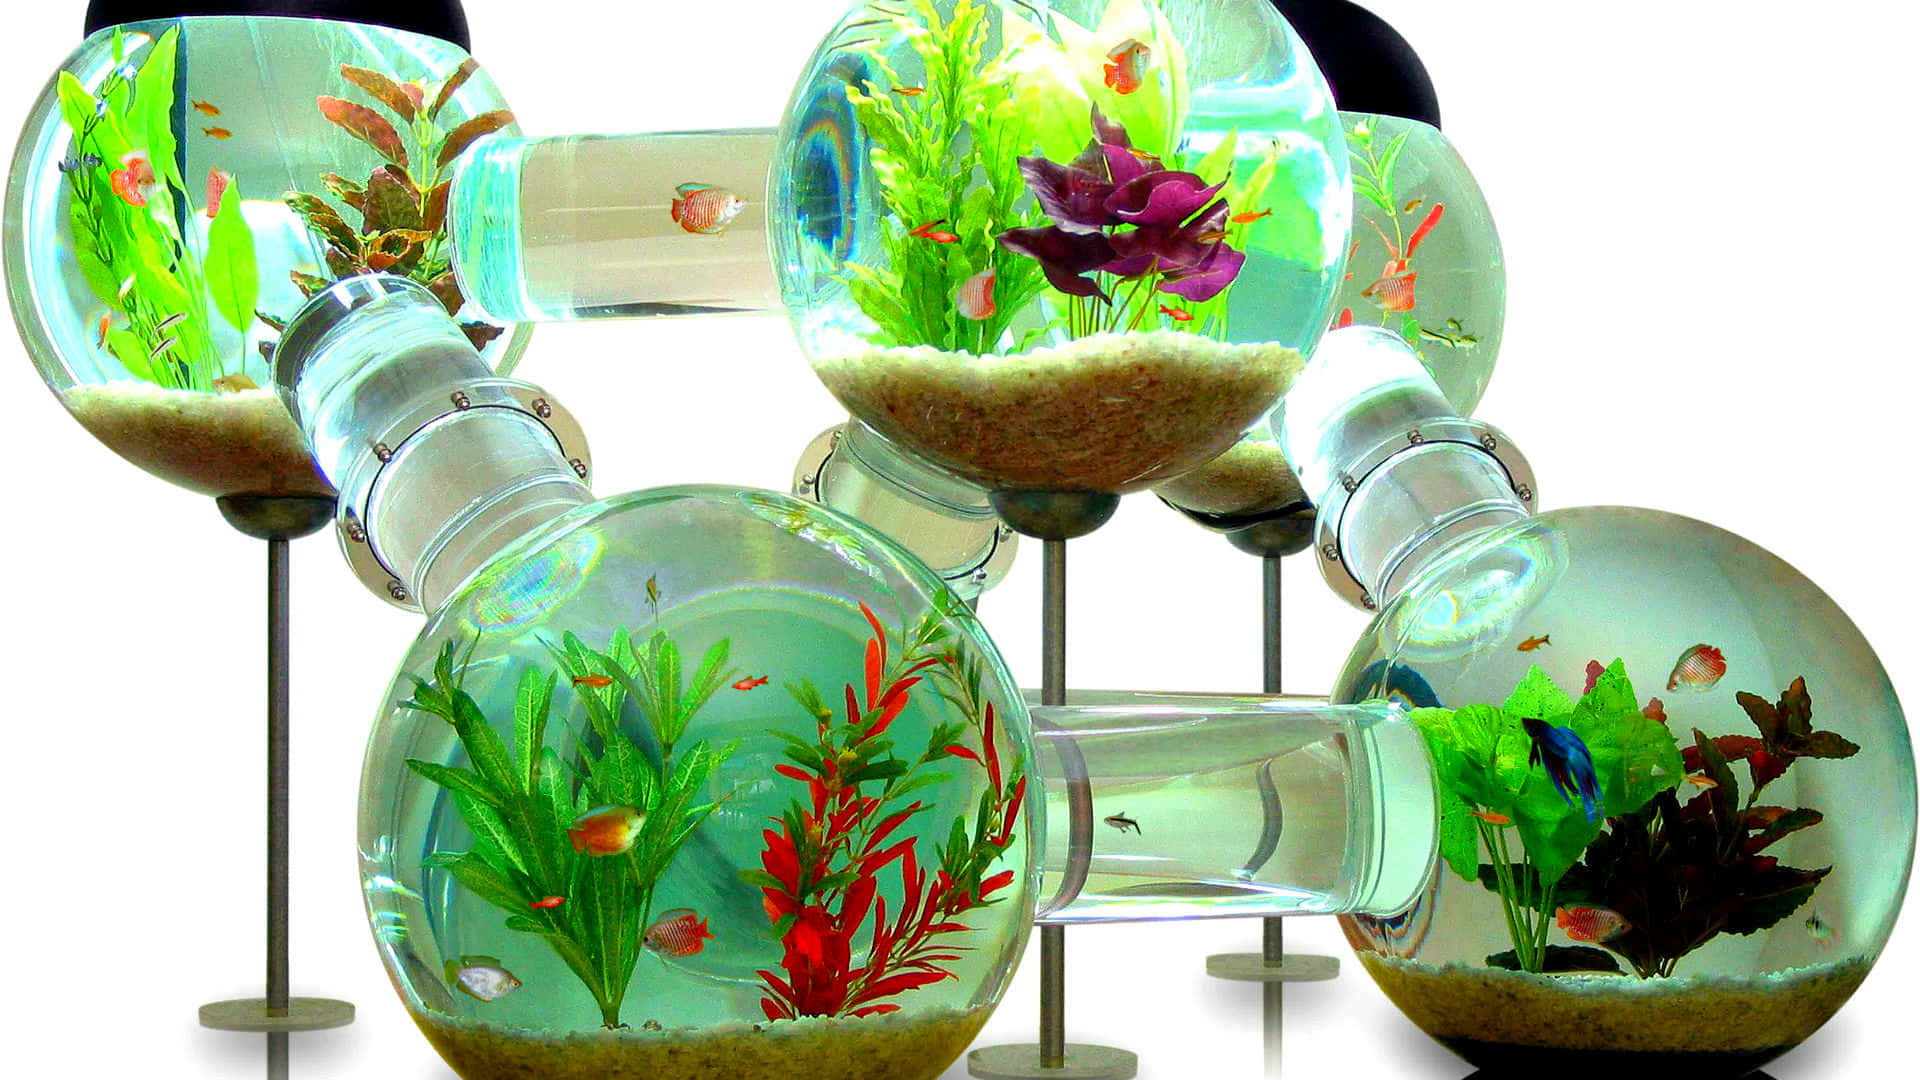 A Group Of Fish Tanks With Plants And Fish